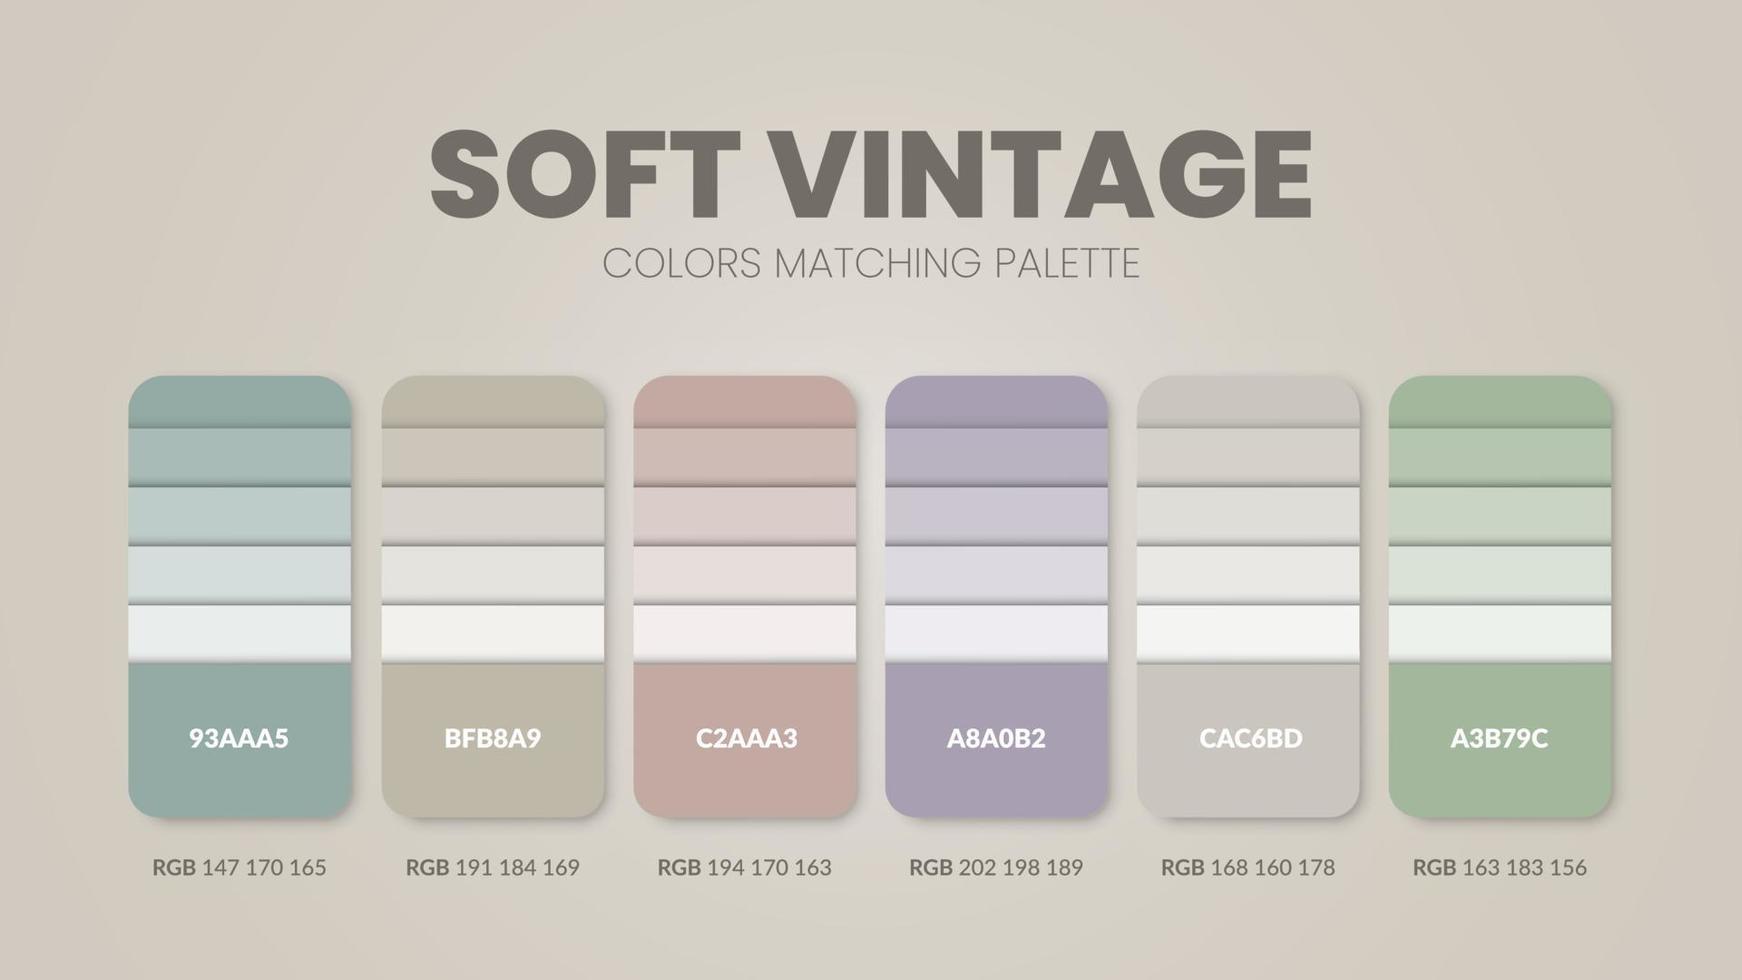 Vintage tone colour schemes ideas.Color palettes are trends combinations and palette guides this year, a table color shades in RGB or  HEX. A color swatch for a spring fashion, home, or interior vector